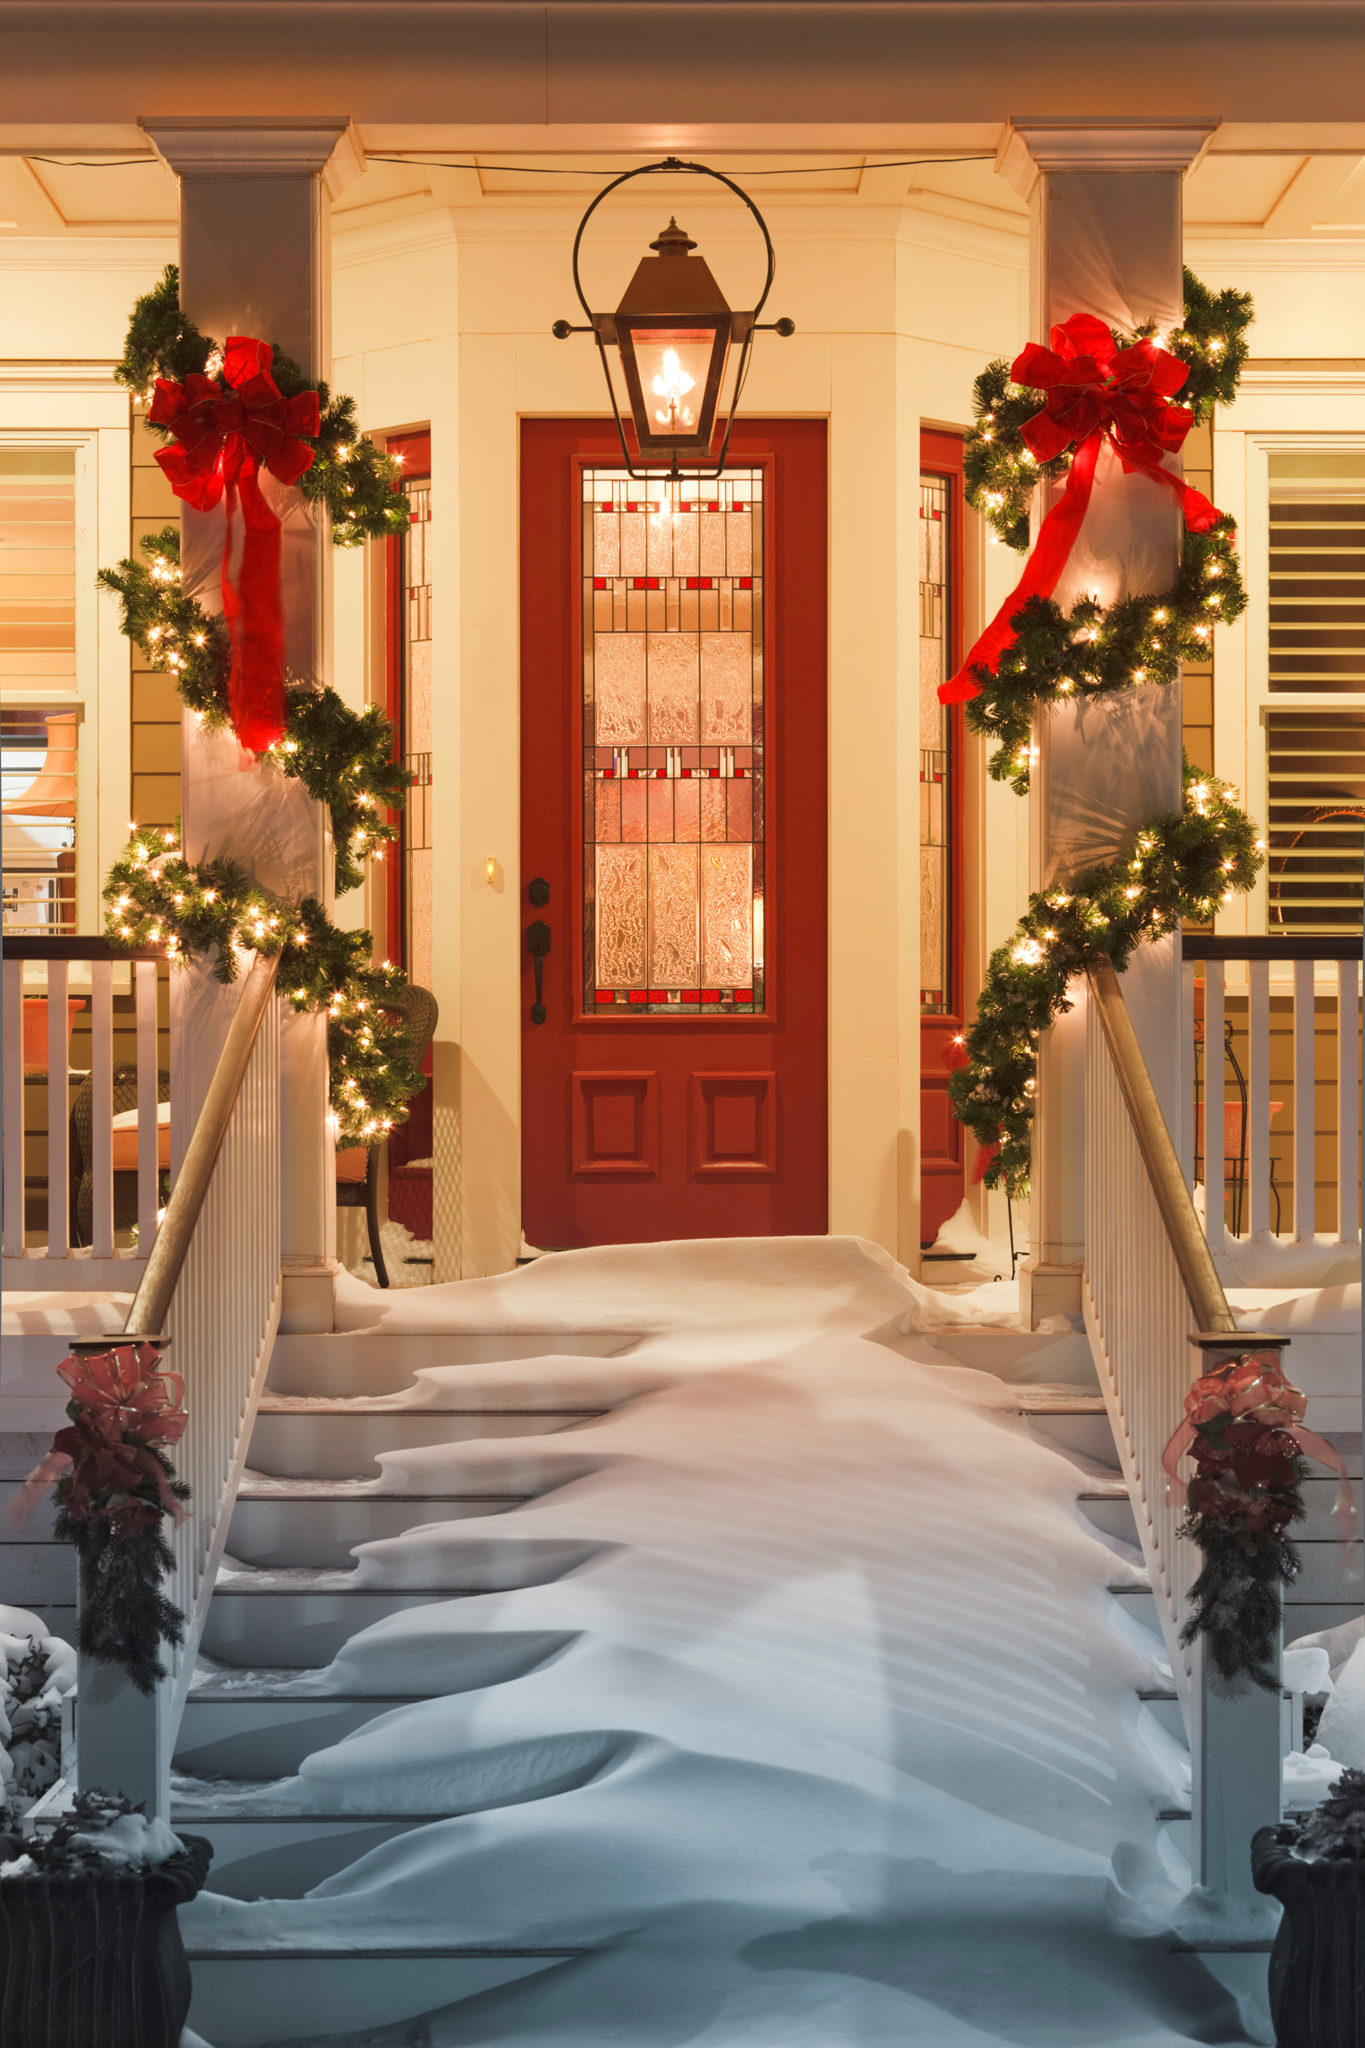 inviting Christmas doorway with snow on porch stairs and railing and lights strung along pillars